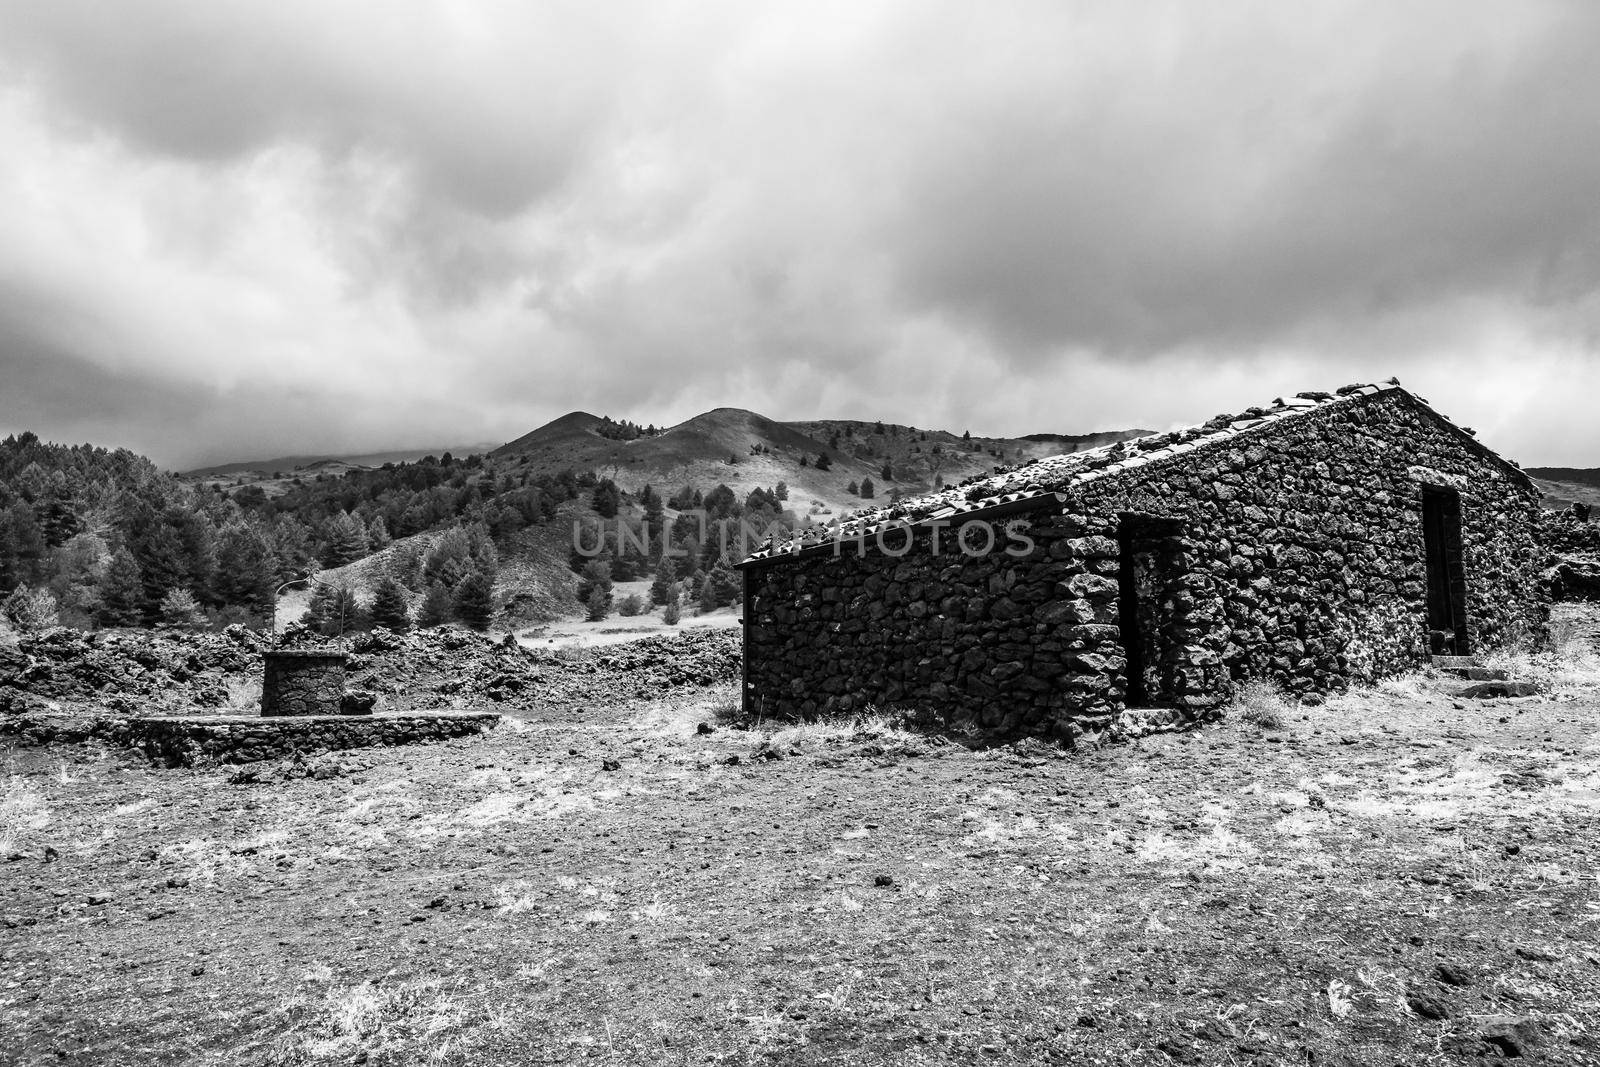 Santa Barbara refuge on Mount Etna and the lava stone well, Sicily by mauricallari